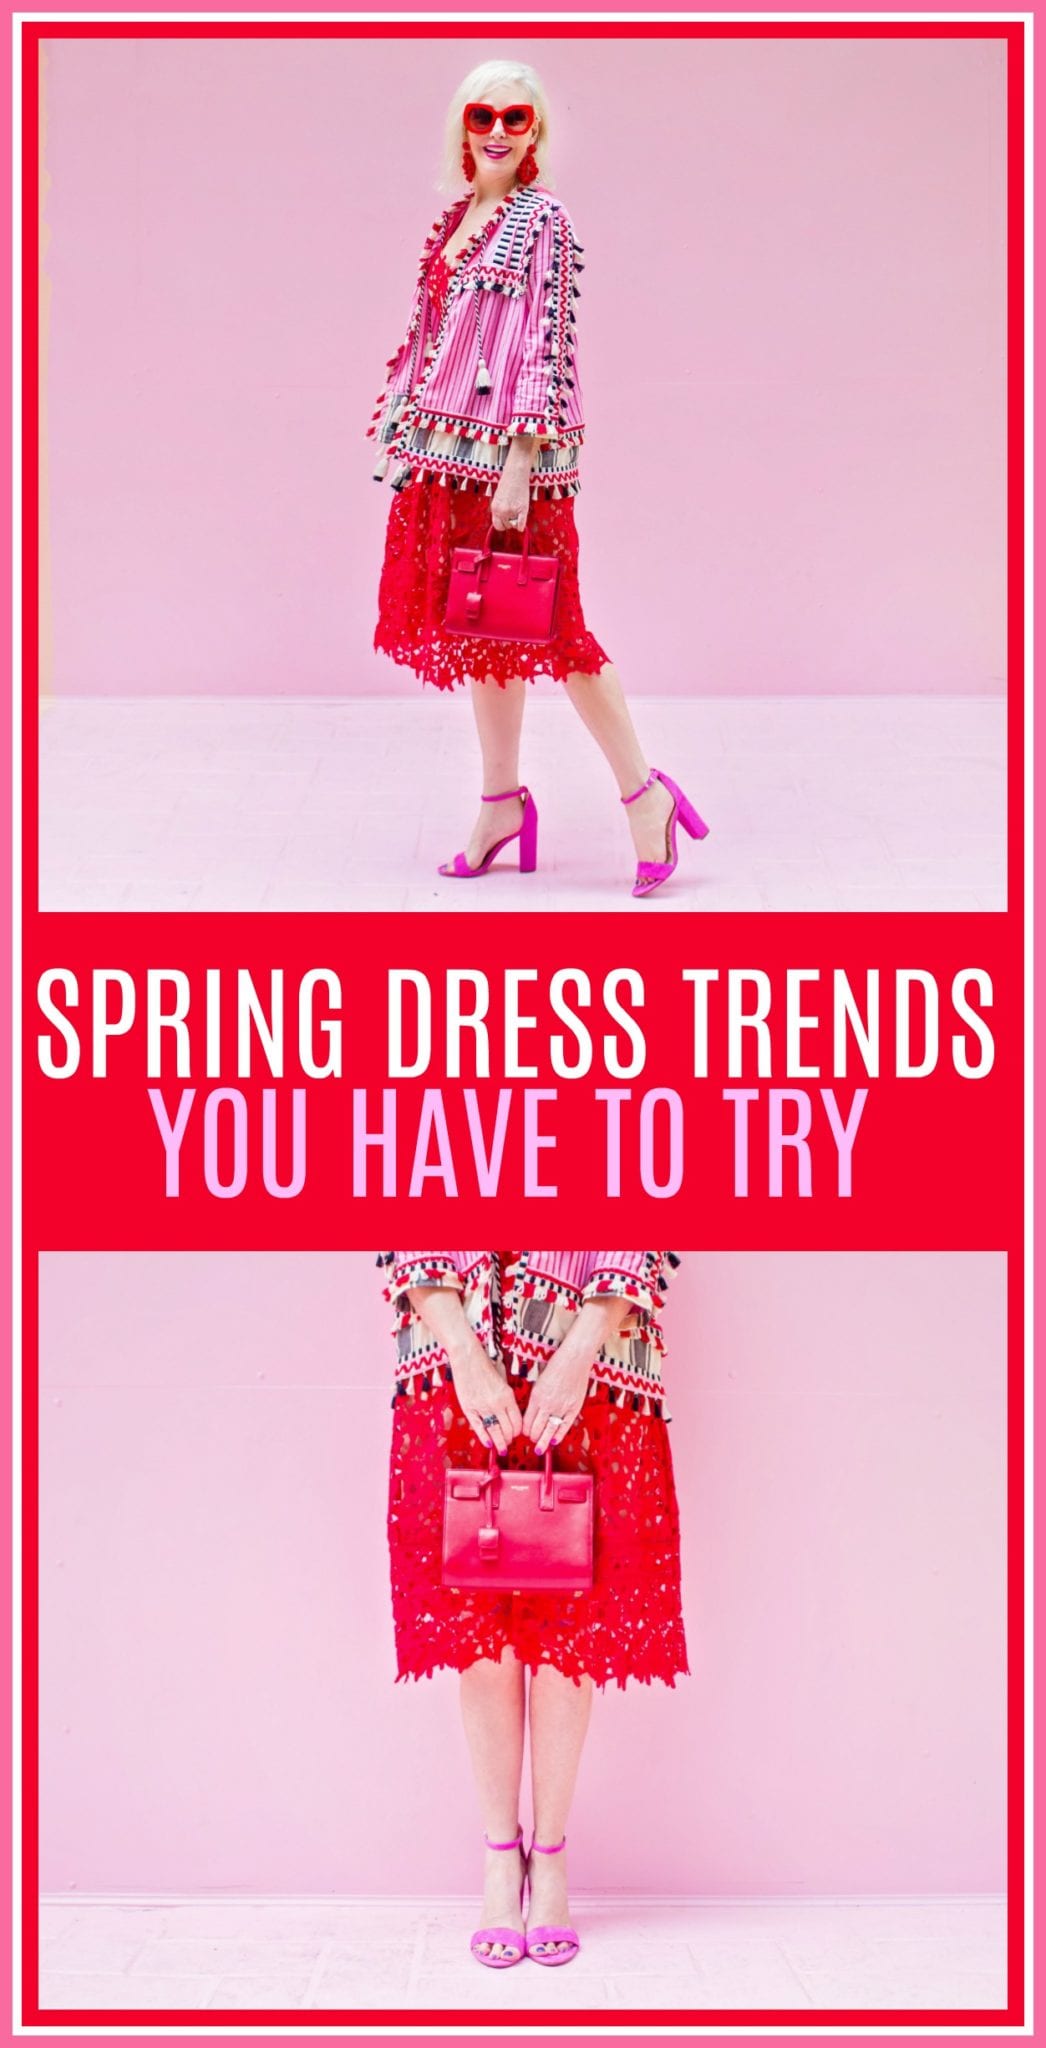 spring dresses, spring outfits, spring dress trends, spring clothing trends, expanding your wardrobe, expanding your closet